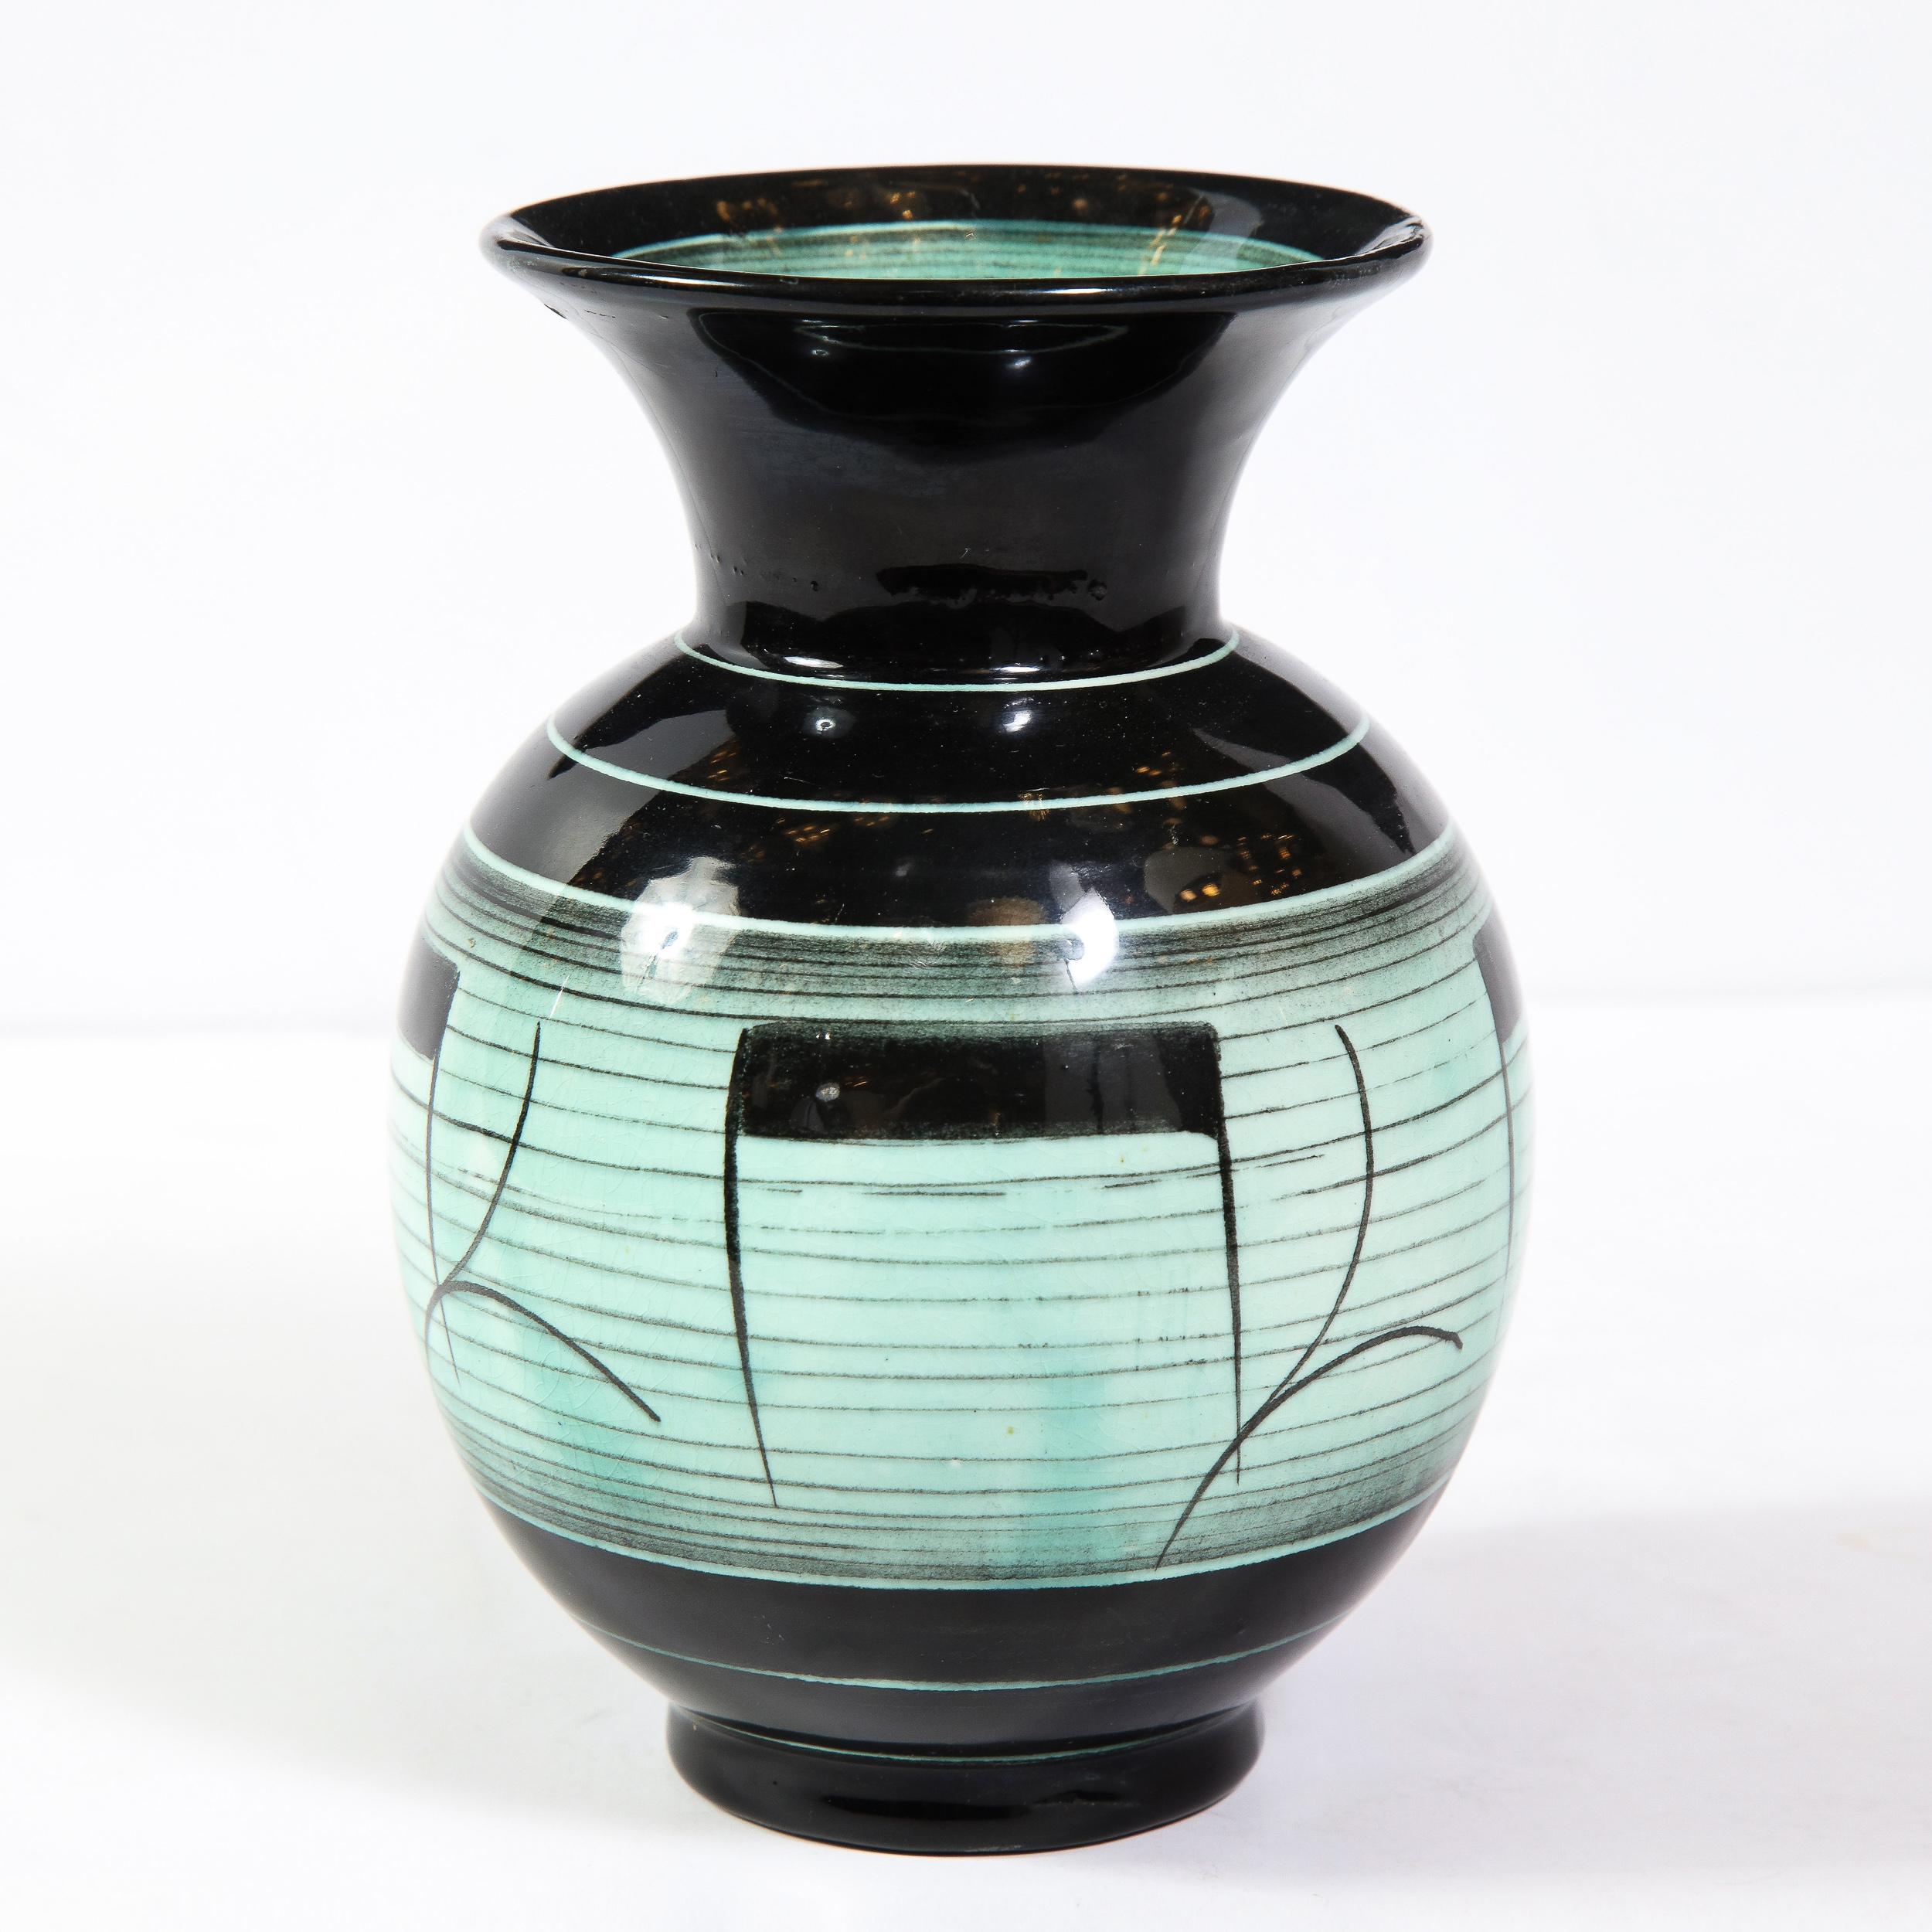 This elegant Art Deco glazed ceramic vase was designed by Ilse Claesson for Rörstrand in Sweden circa 1930. It features a stylized hour glass form with a striated onyx glazed base and a sea foam center with abstract hand painted motifs, as well as